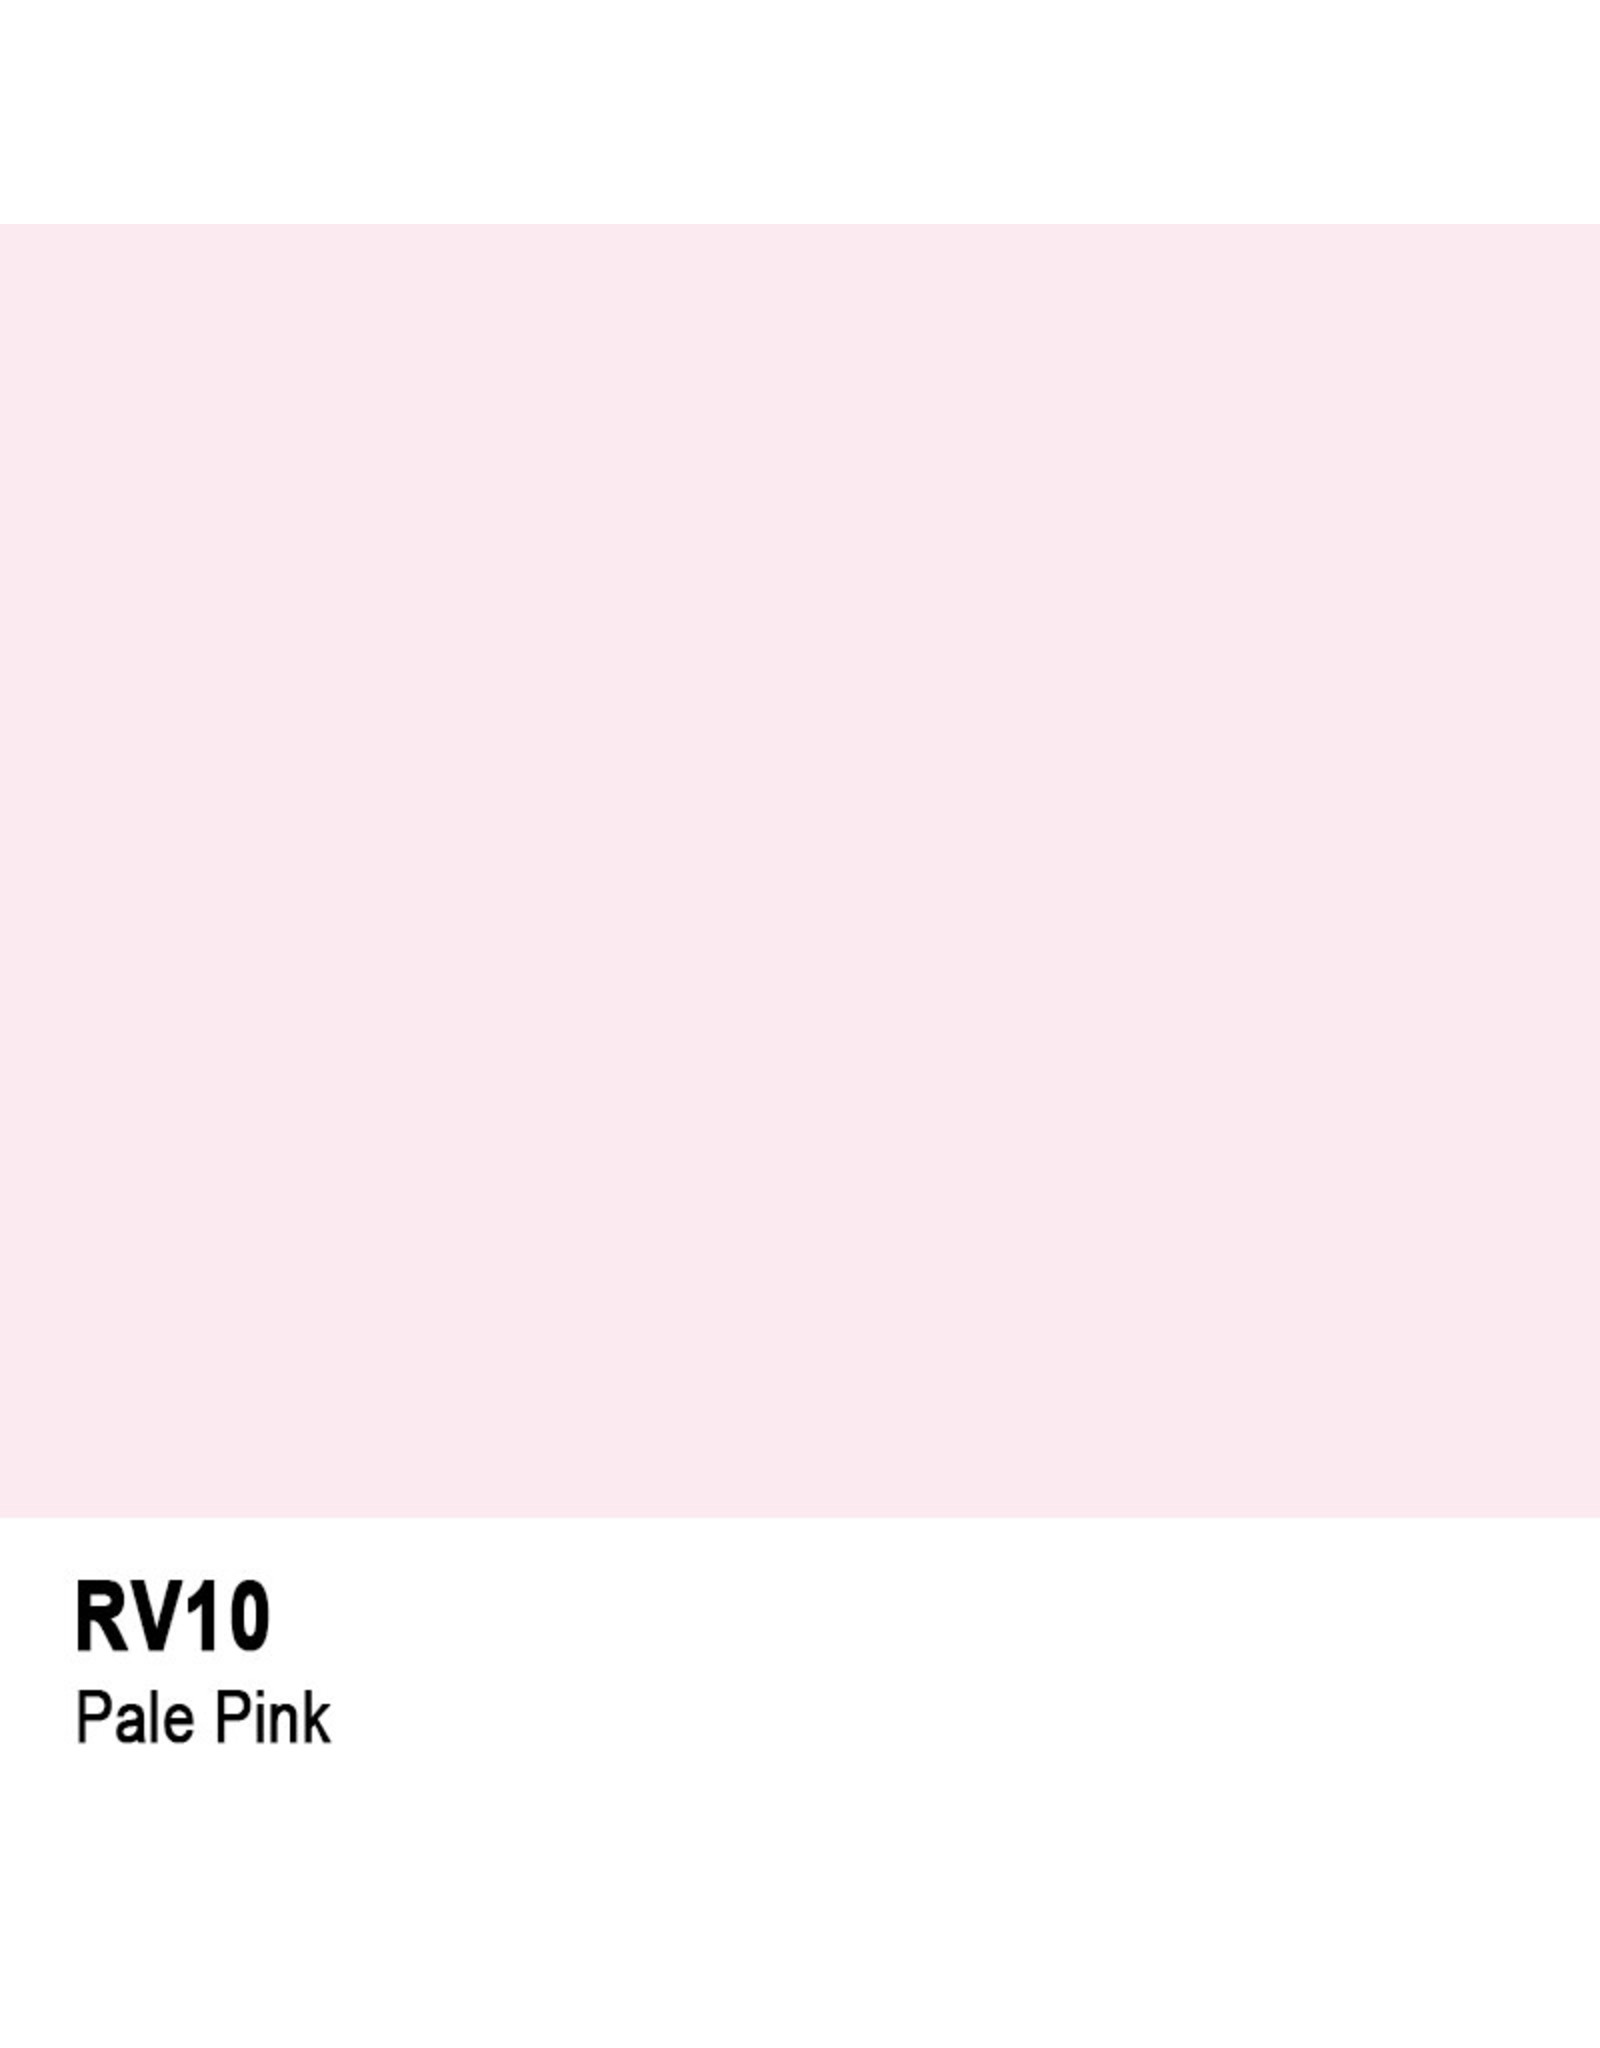 COPIC COPIC RV10 PALE PINK SKETCH MARKER